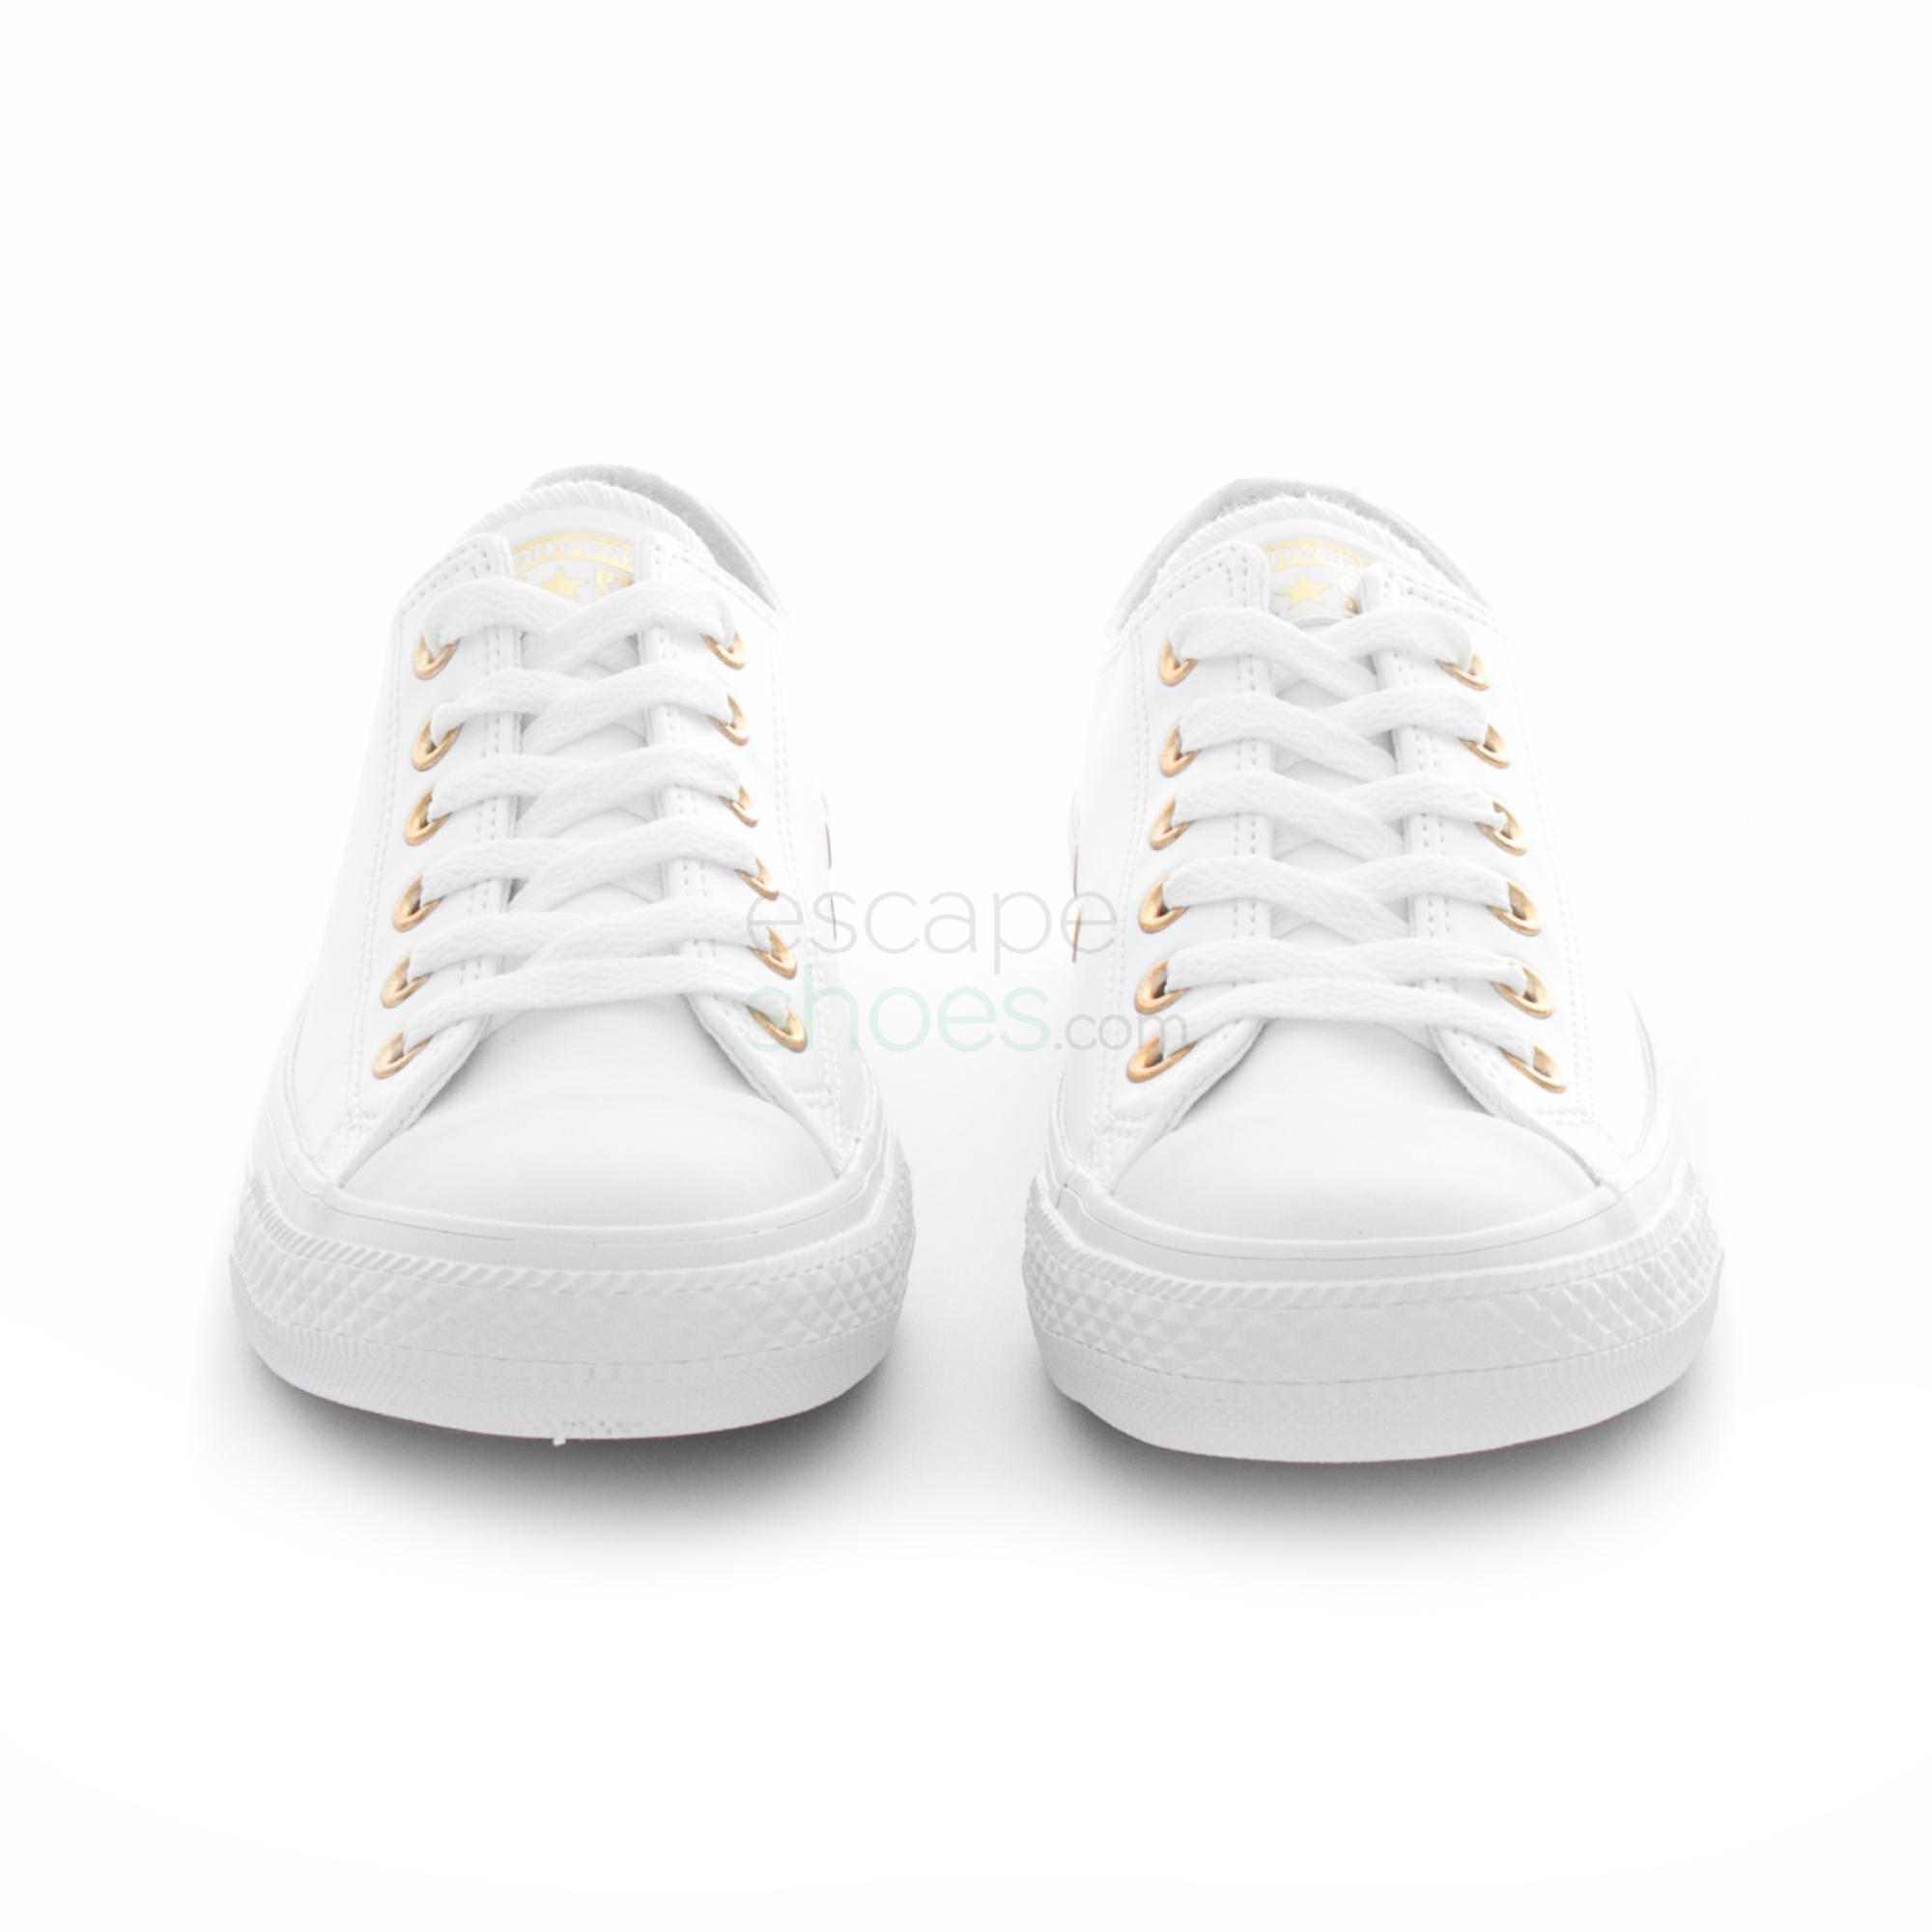 white and gold chuck taylor converse